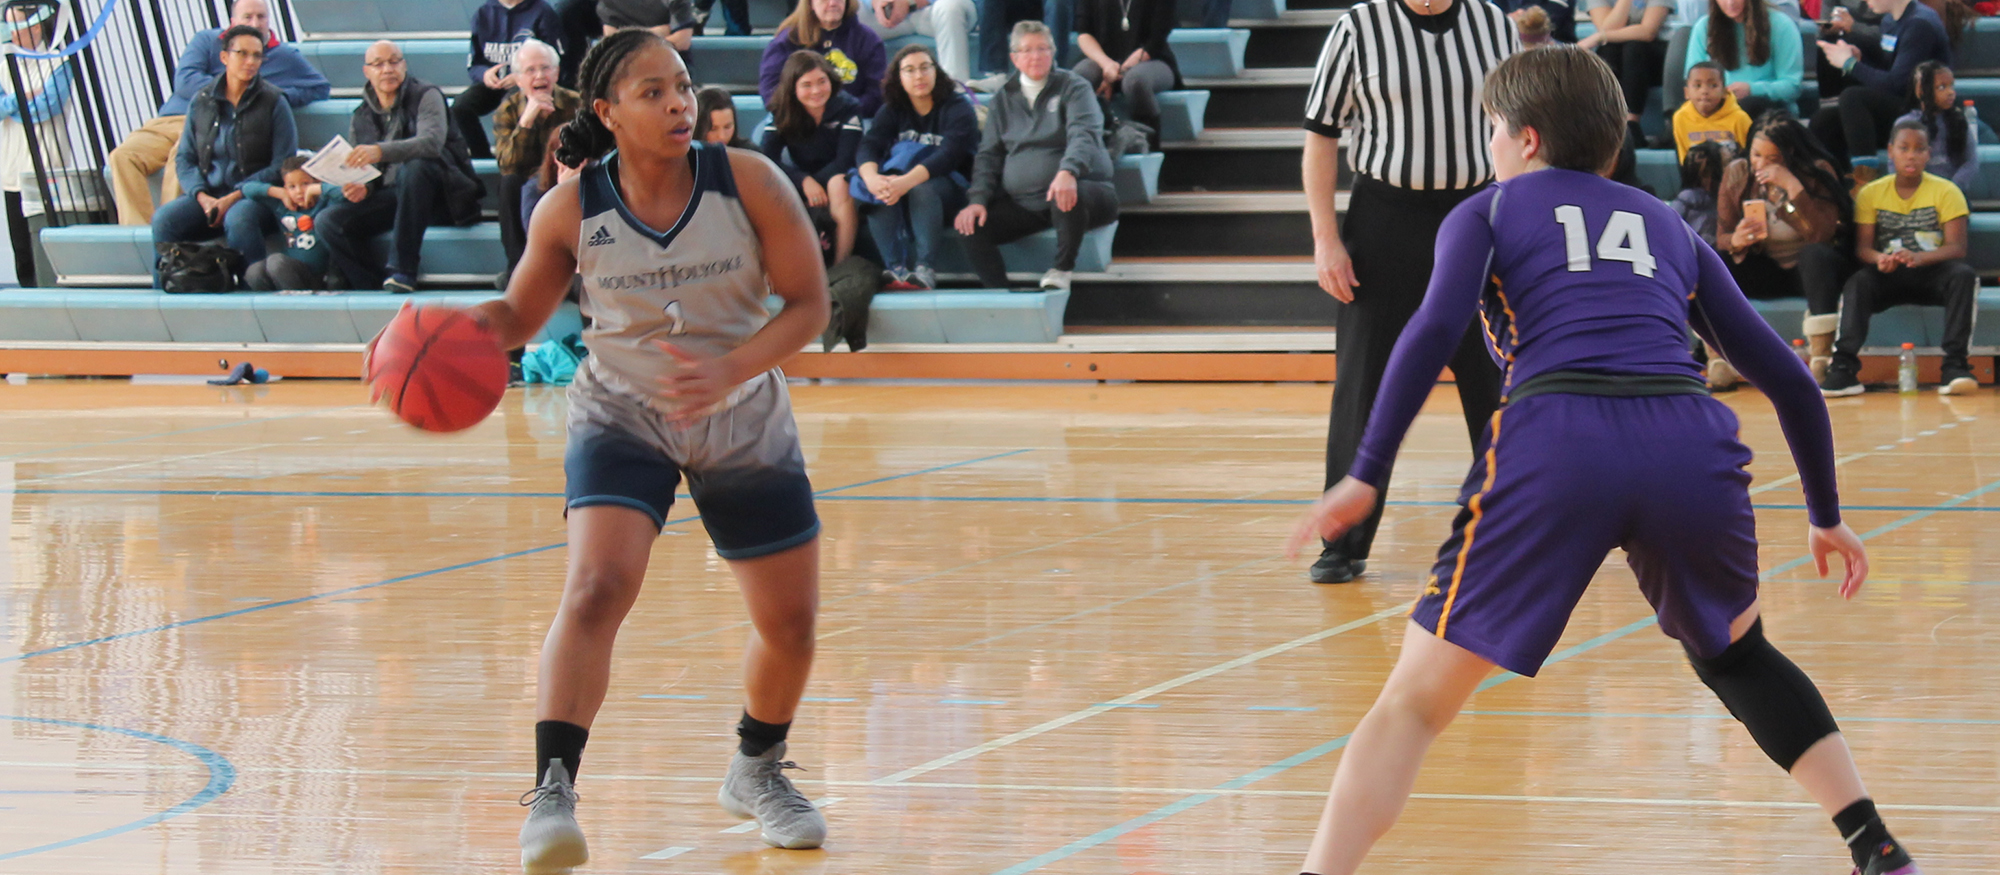 Action photo from the Feb. 16, 2019 basketball game against Emerson College of Lyons student-athlete Zahkeyah Allen.